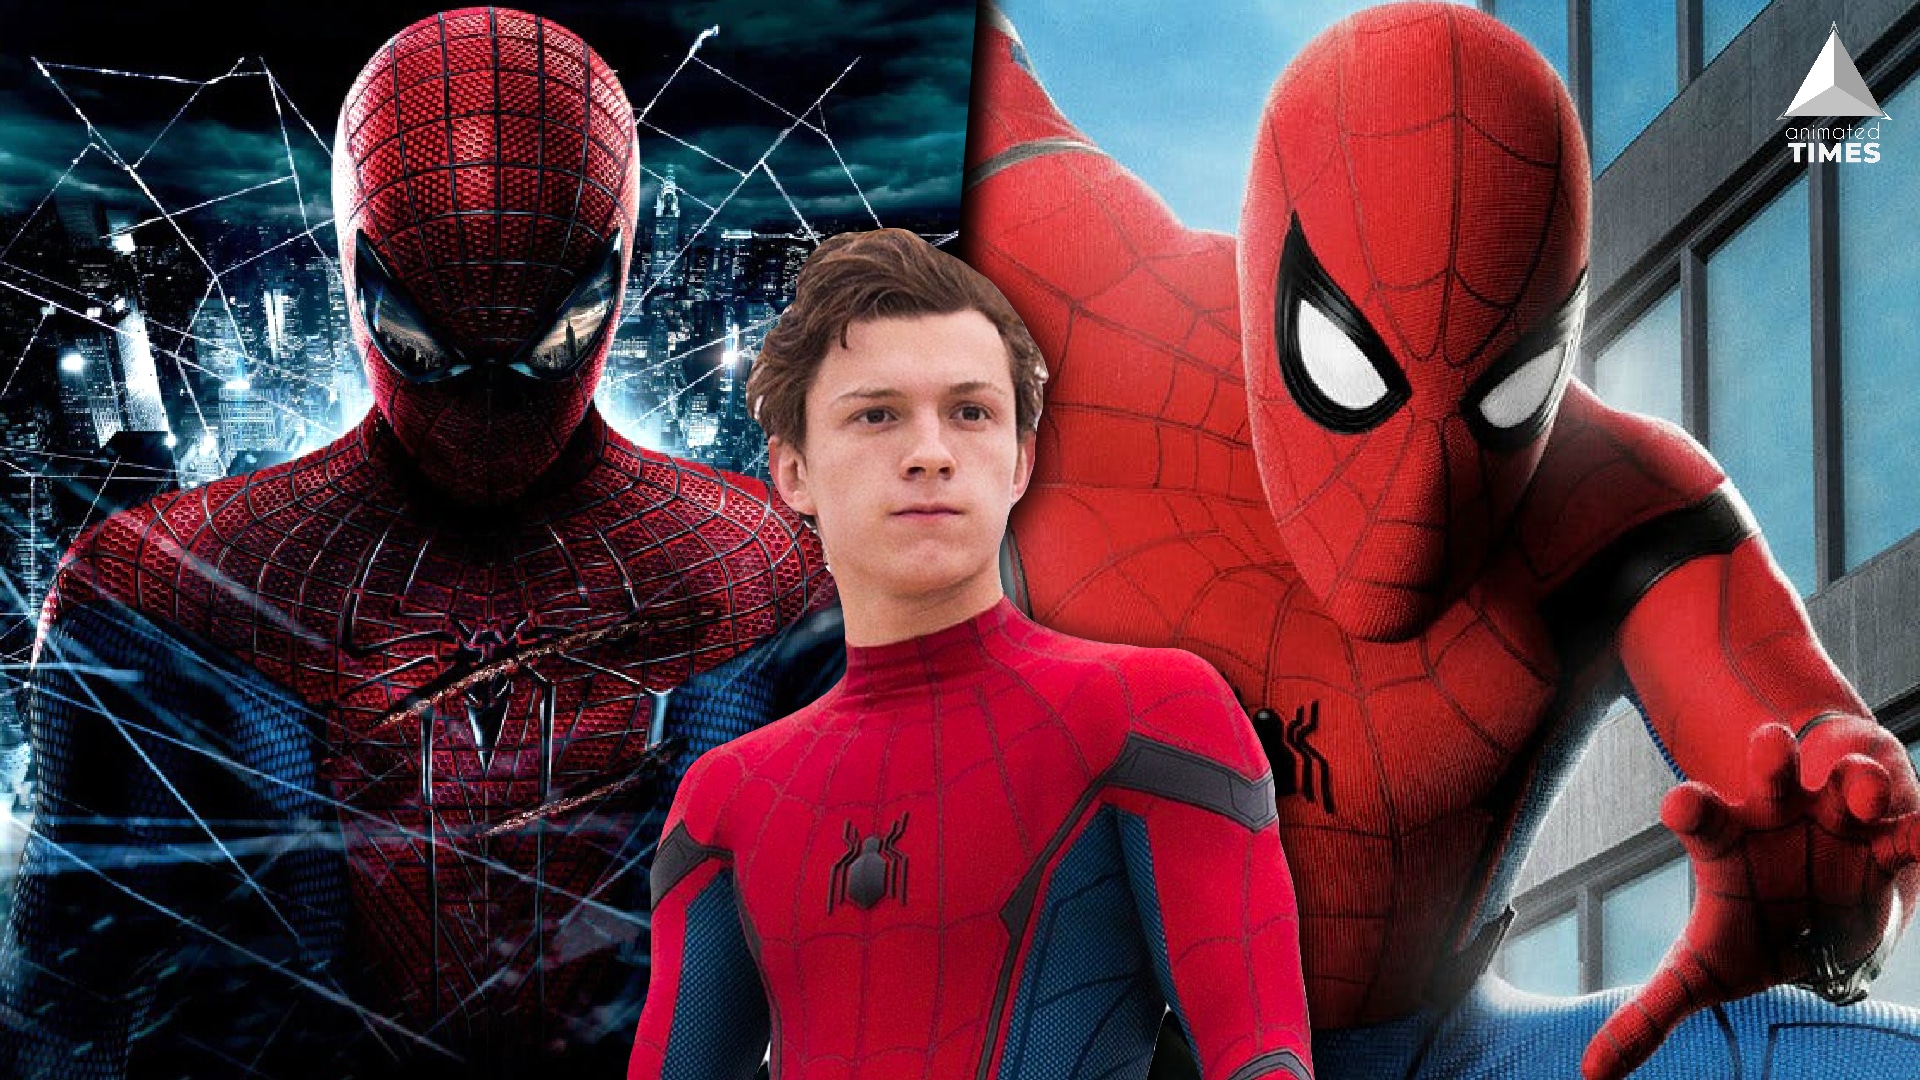 MCU Spider-Man 3: Why The Spider-Verse is a Disastrous Idea